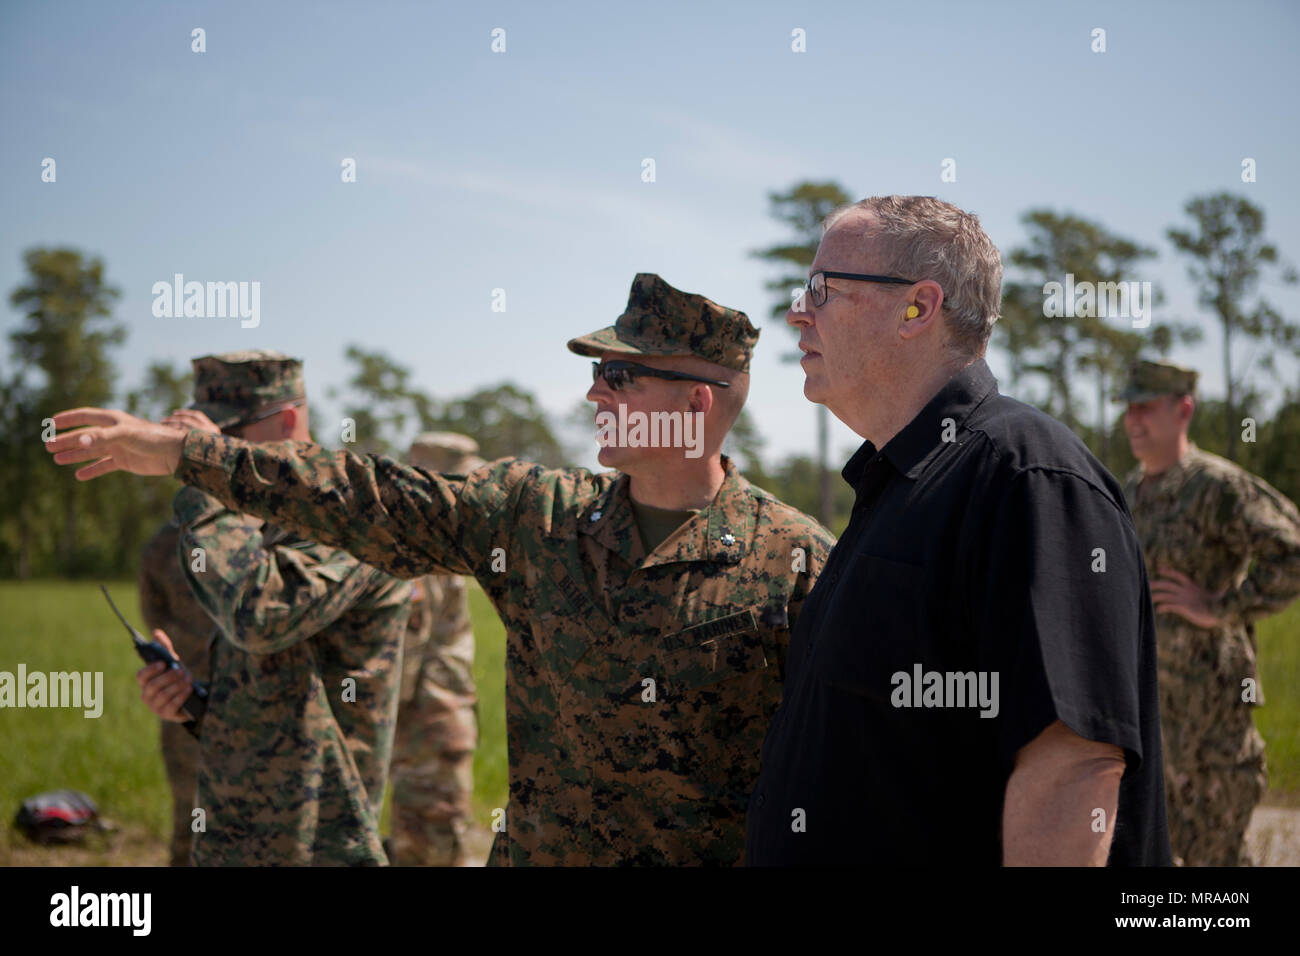 The Deputy Secretary of Defense, Honorable Mr. Robert O. Work, right, speaks with Lt. Col. Theodore Bethea, commanding officer of Advanced Infantry Training Battalion-East, School of Infantry- East, at Camp Lejeune, N.C., June 2, 2017. Marines from the School of Infantry demonstrated a live fire exercise as a part of training to diplomats and military personnel during their visit to the base.  (U.S. Marine Corps photo by Lance Cpl. Tyler Pender) Stock Photo